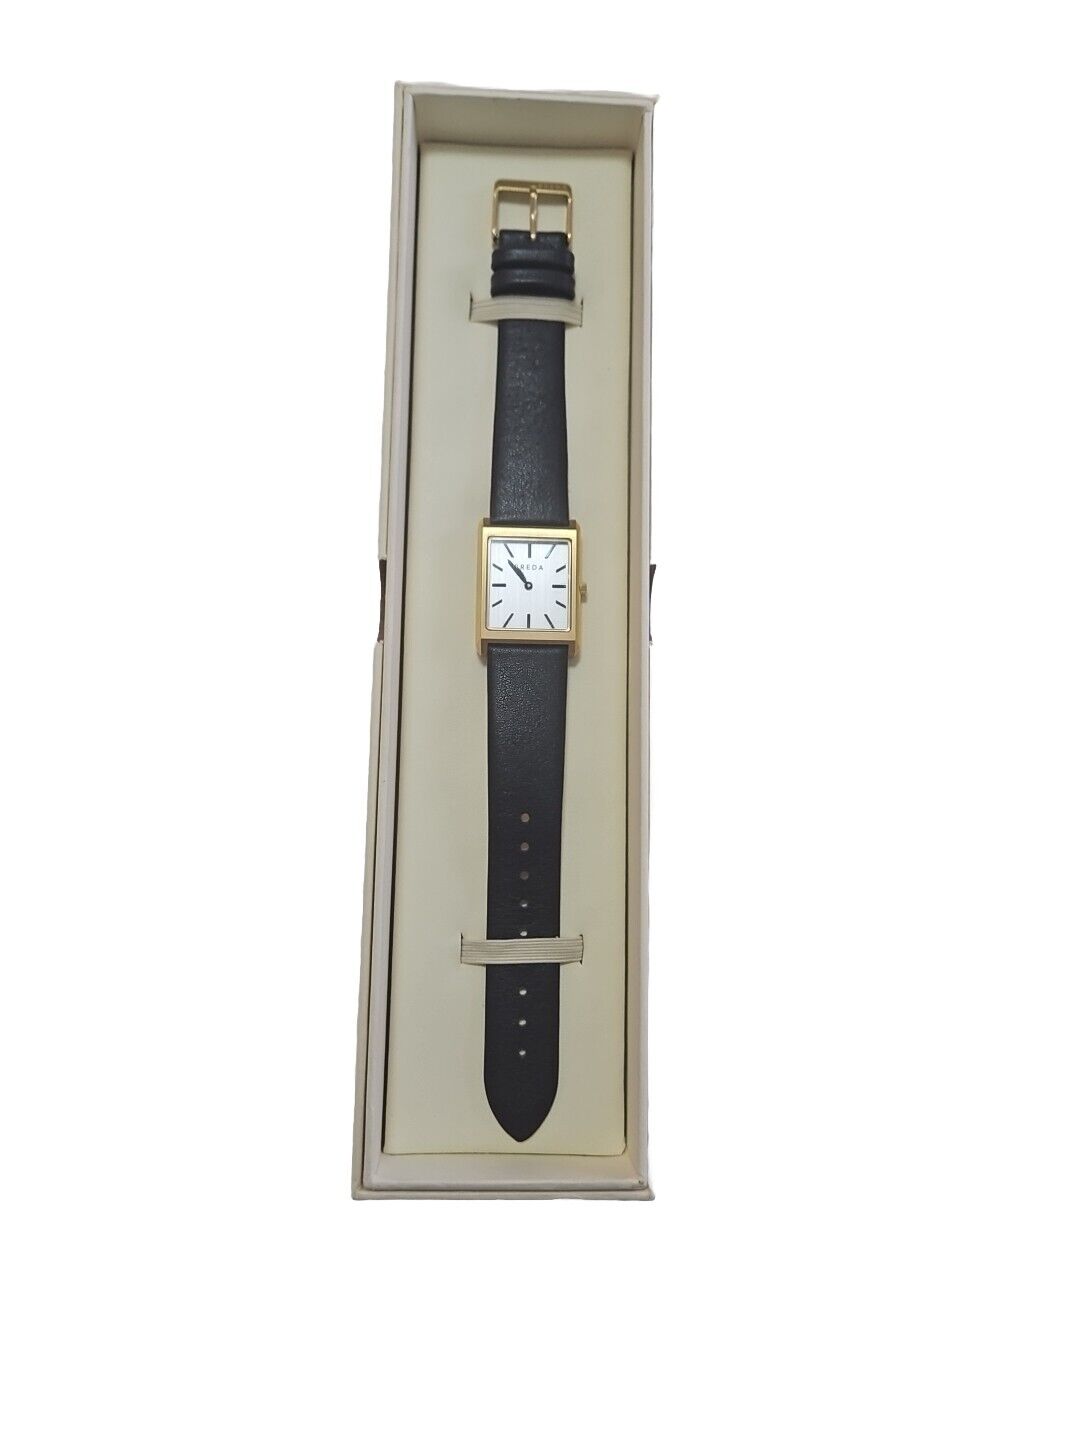 Breda Virgil 1736b Gold Square Wrist Watch with Genuine Black Leather Band 26MM